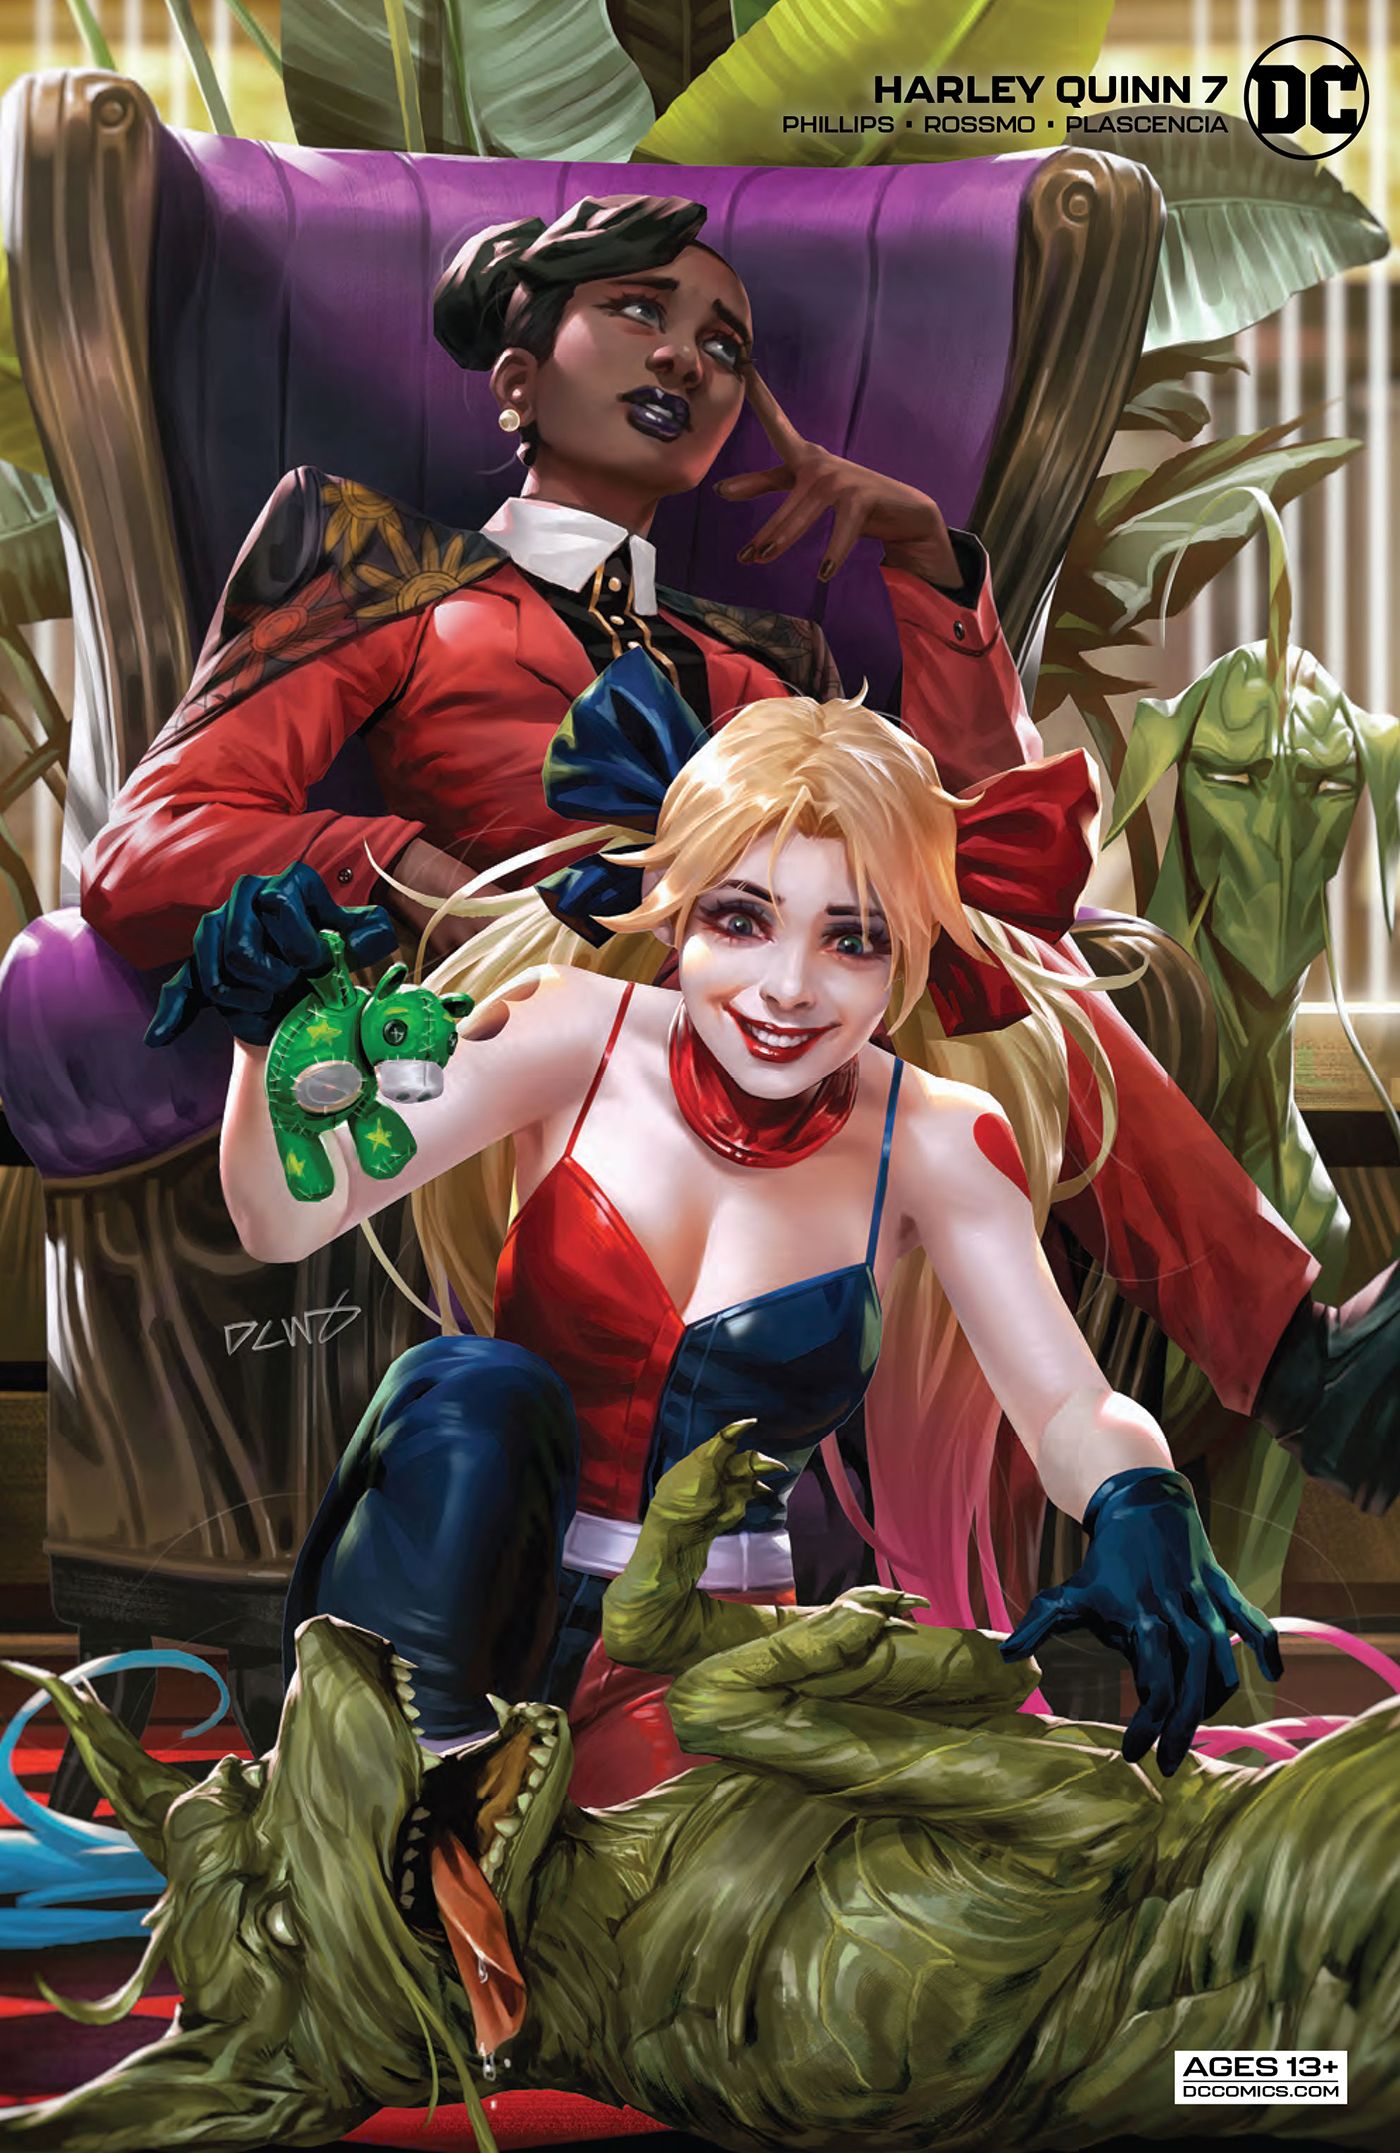 The Derrick Chew variant cover for Harley Quinn #7.